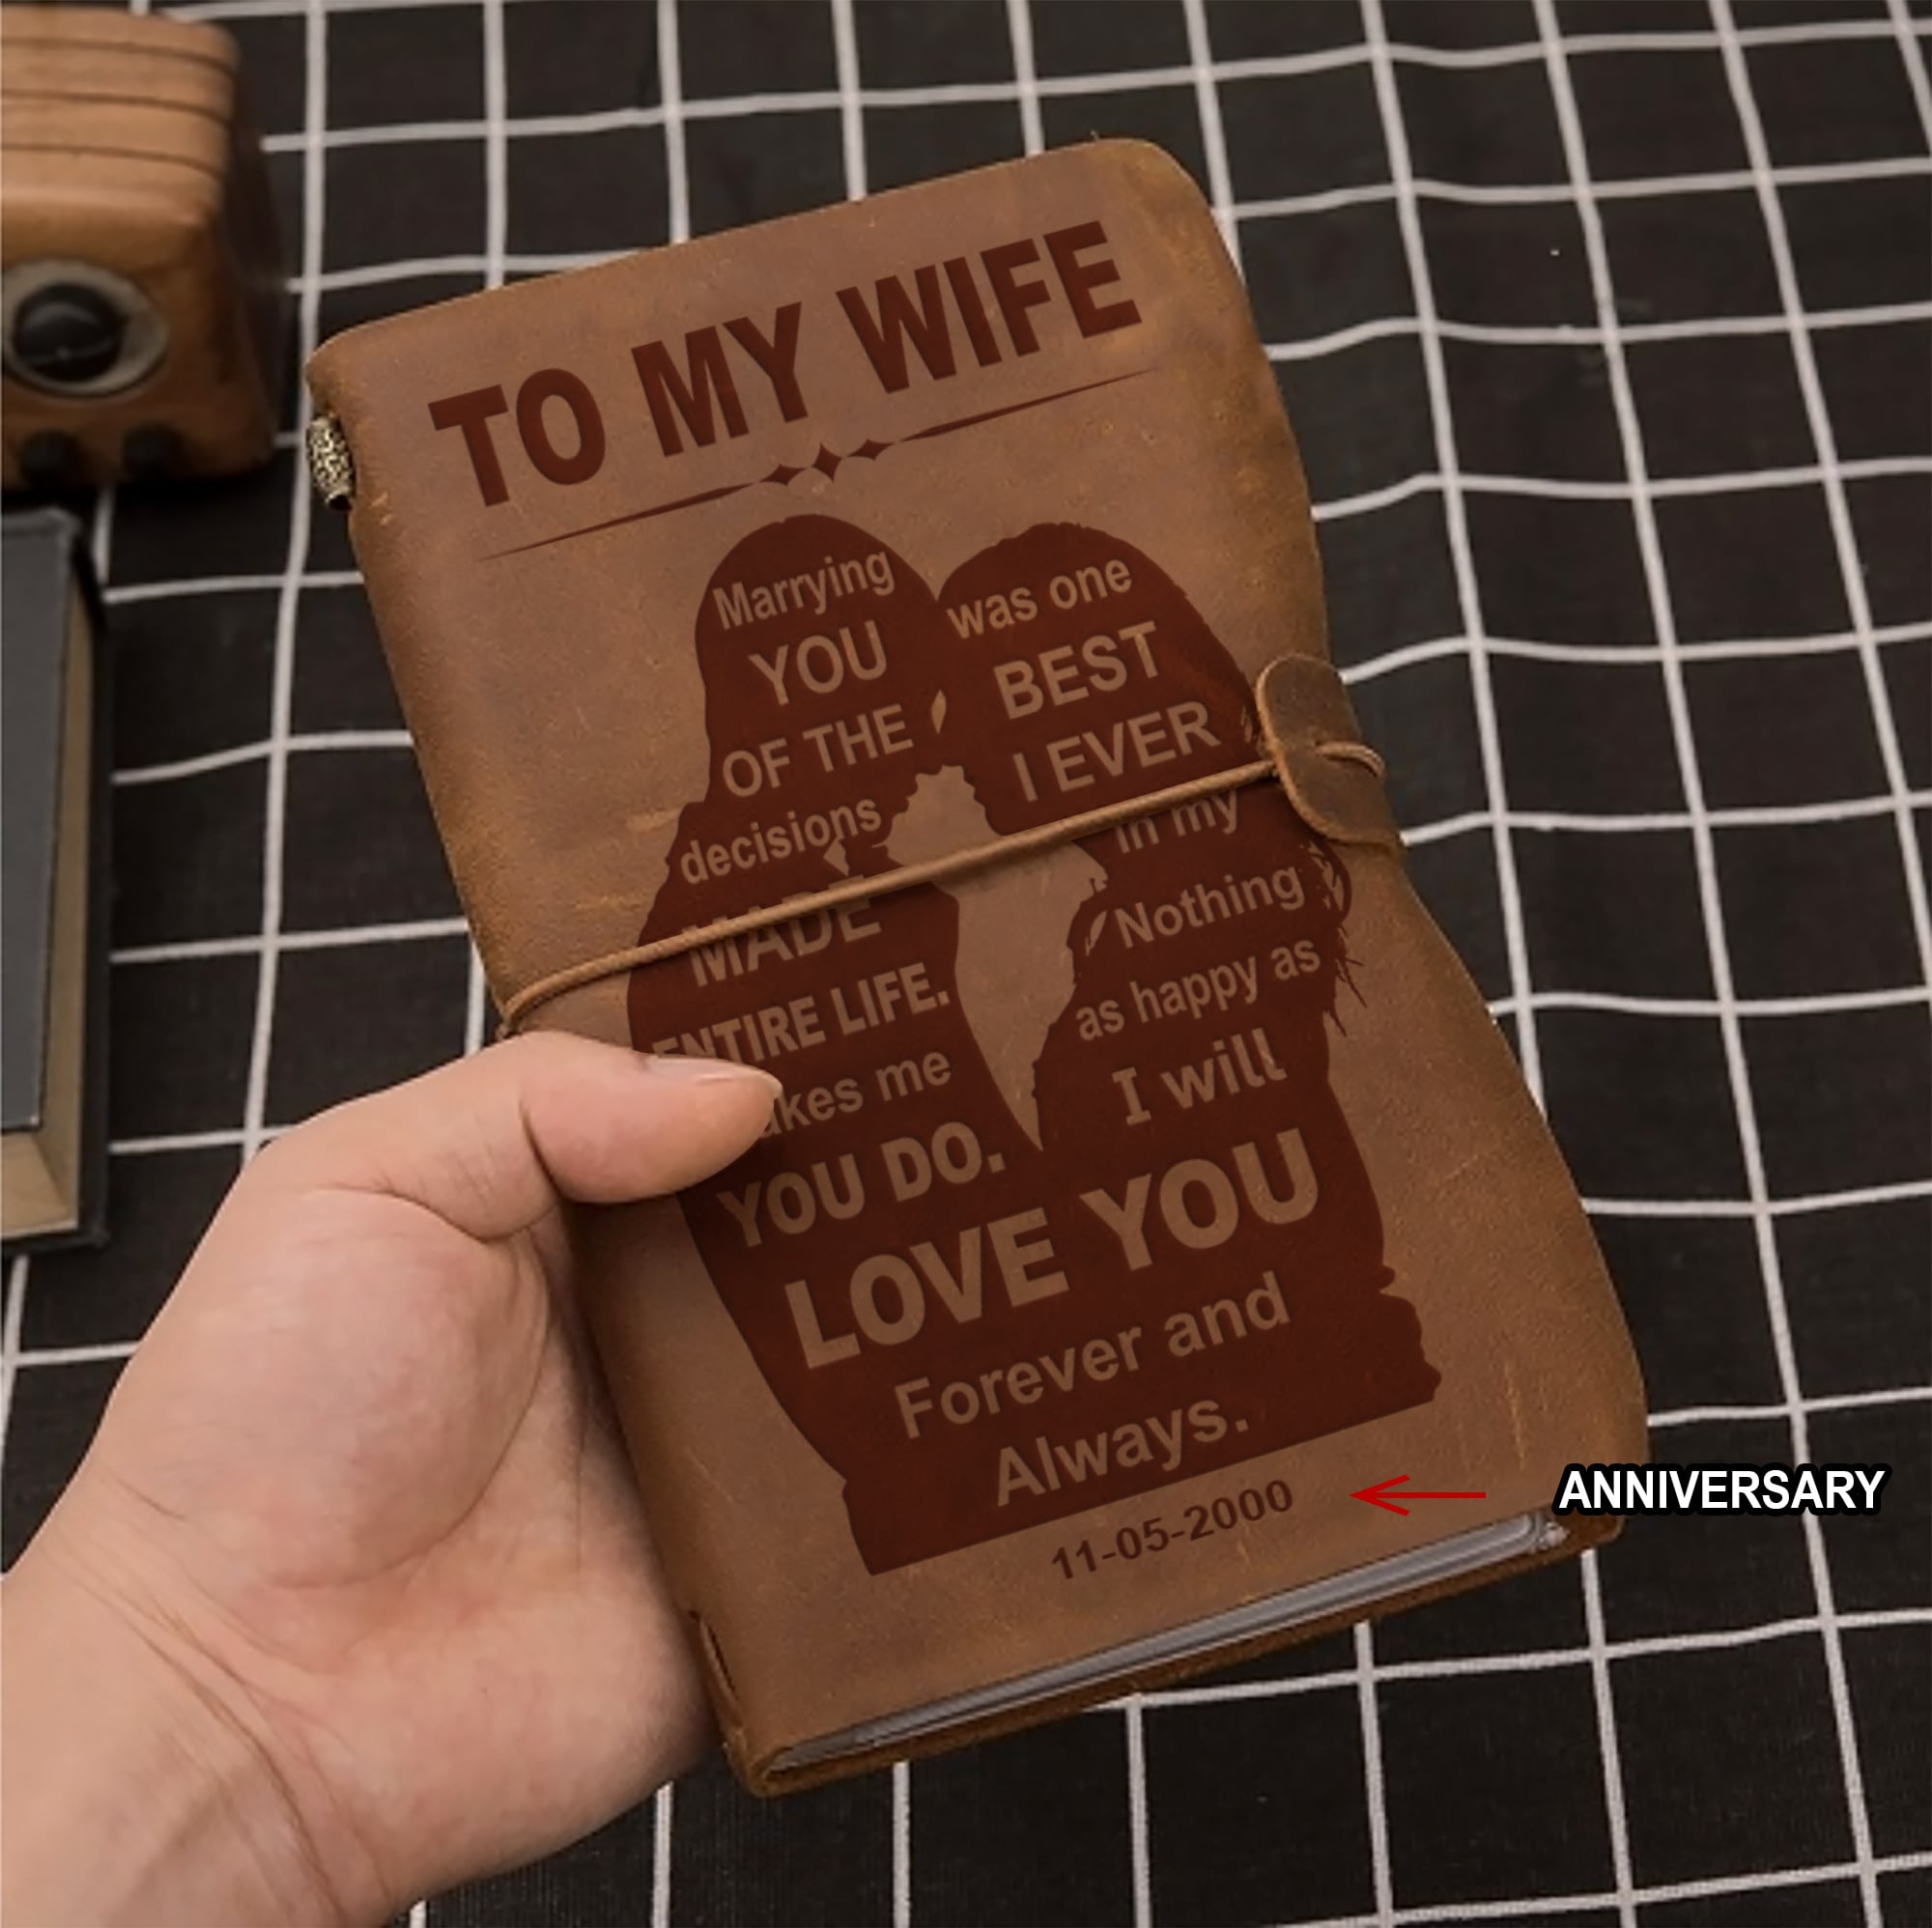 Perfect for anniversaries, birthdays, or just because-Vintage Journal Husband to wife- Marrying you was one of the best decision I ever made